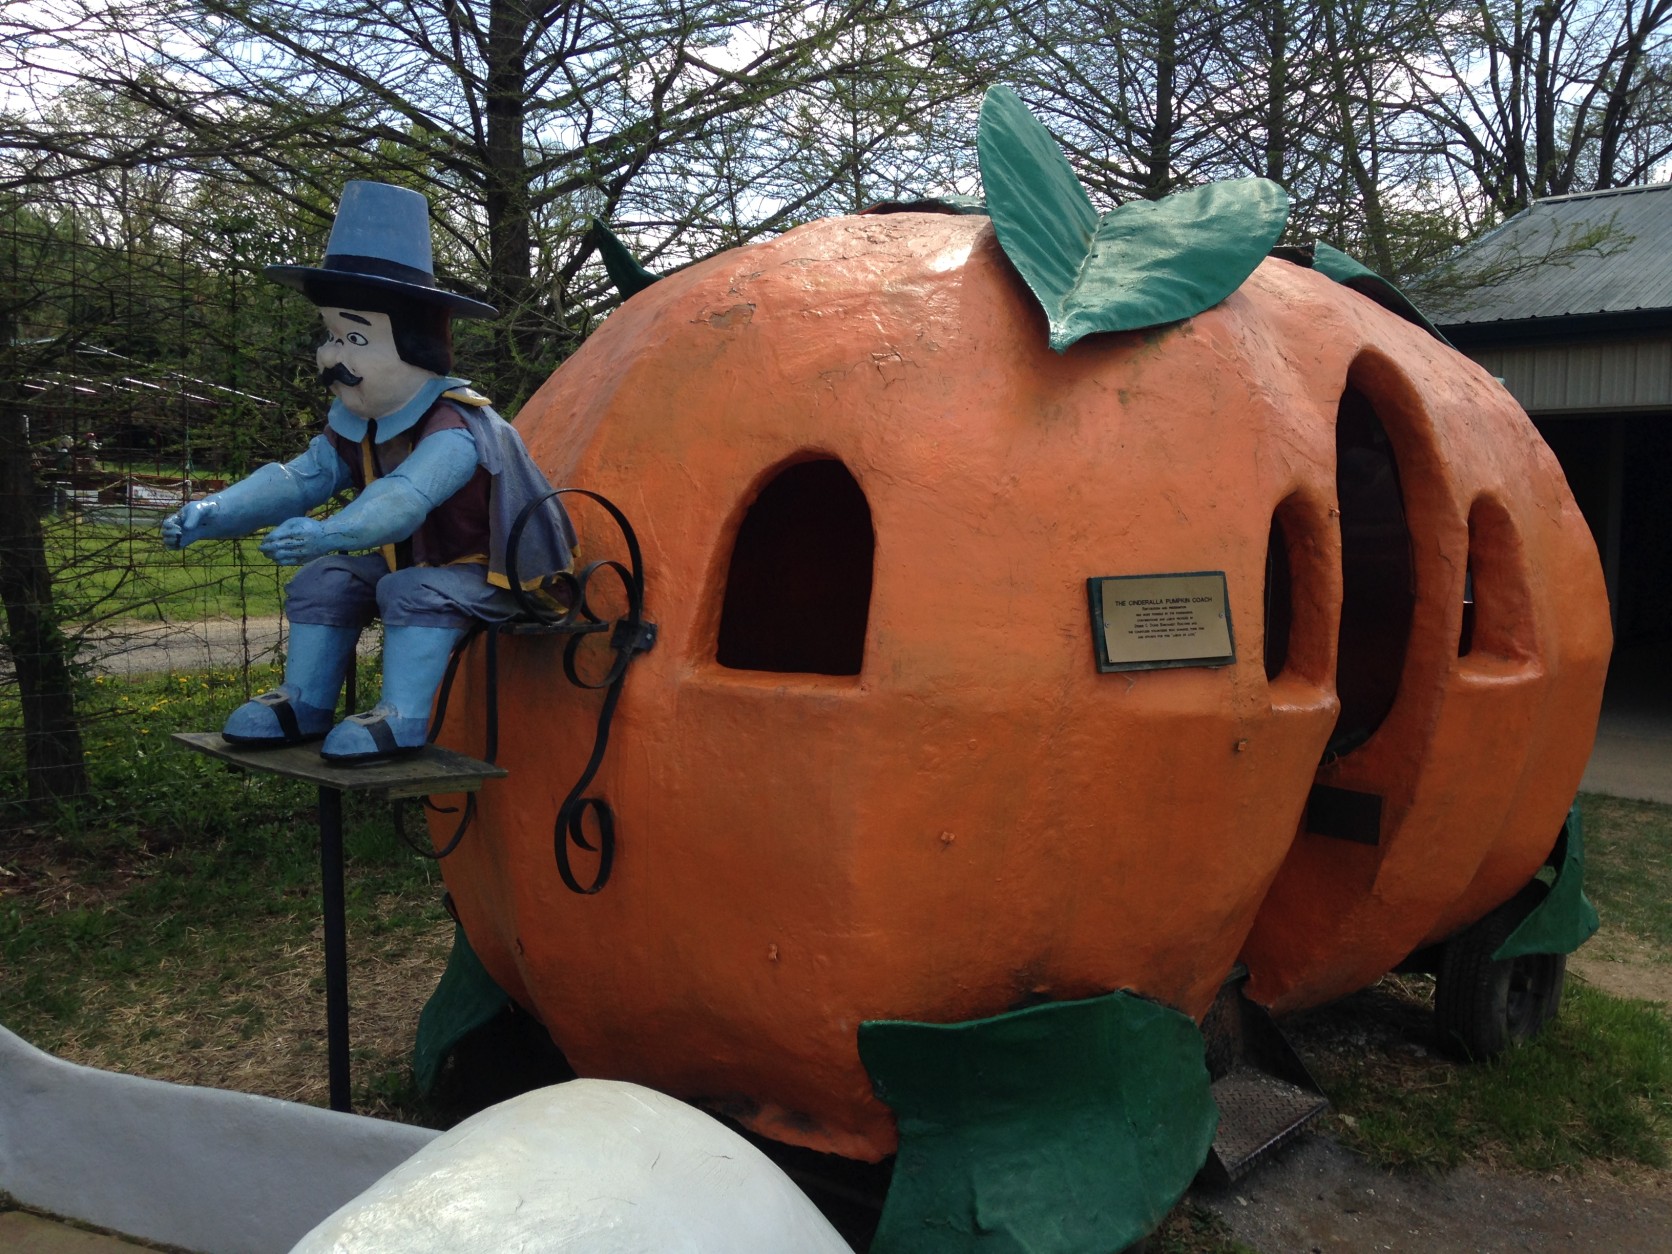 In 2004, the Pumpkin Coach became the first item from the closed theme park to be moved to Clark's Elioak Farm. (WTOP/Michelle Basch)